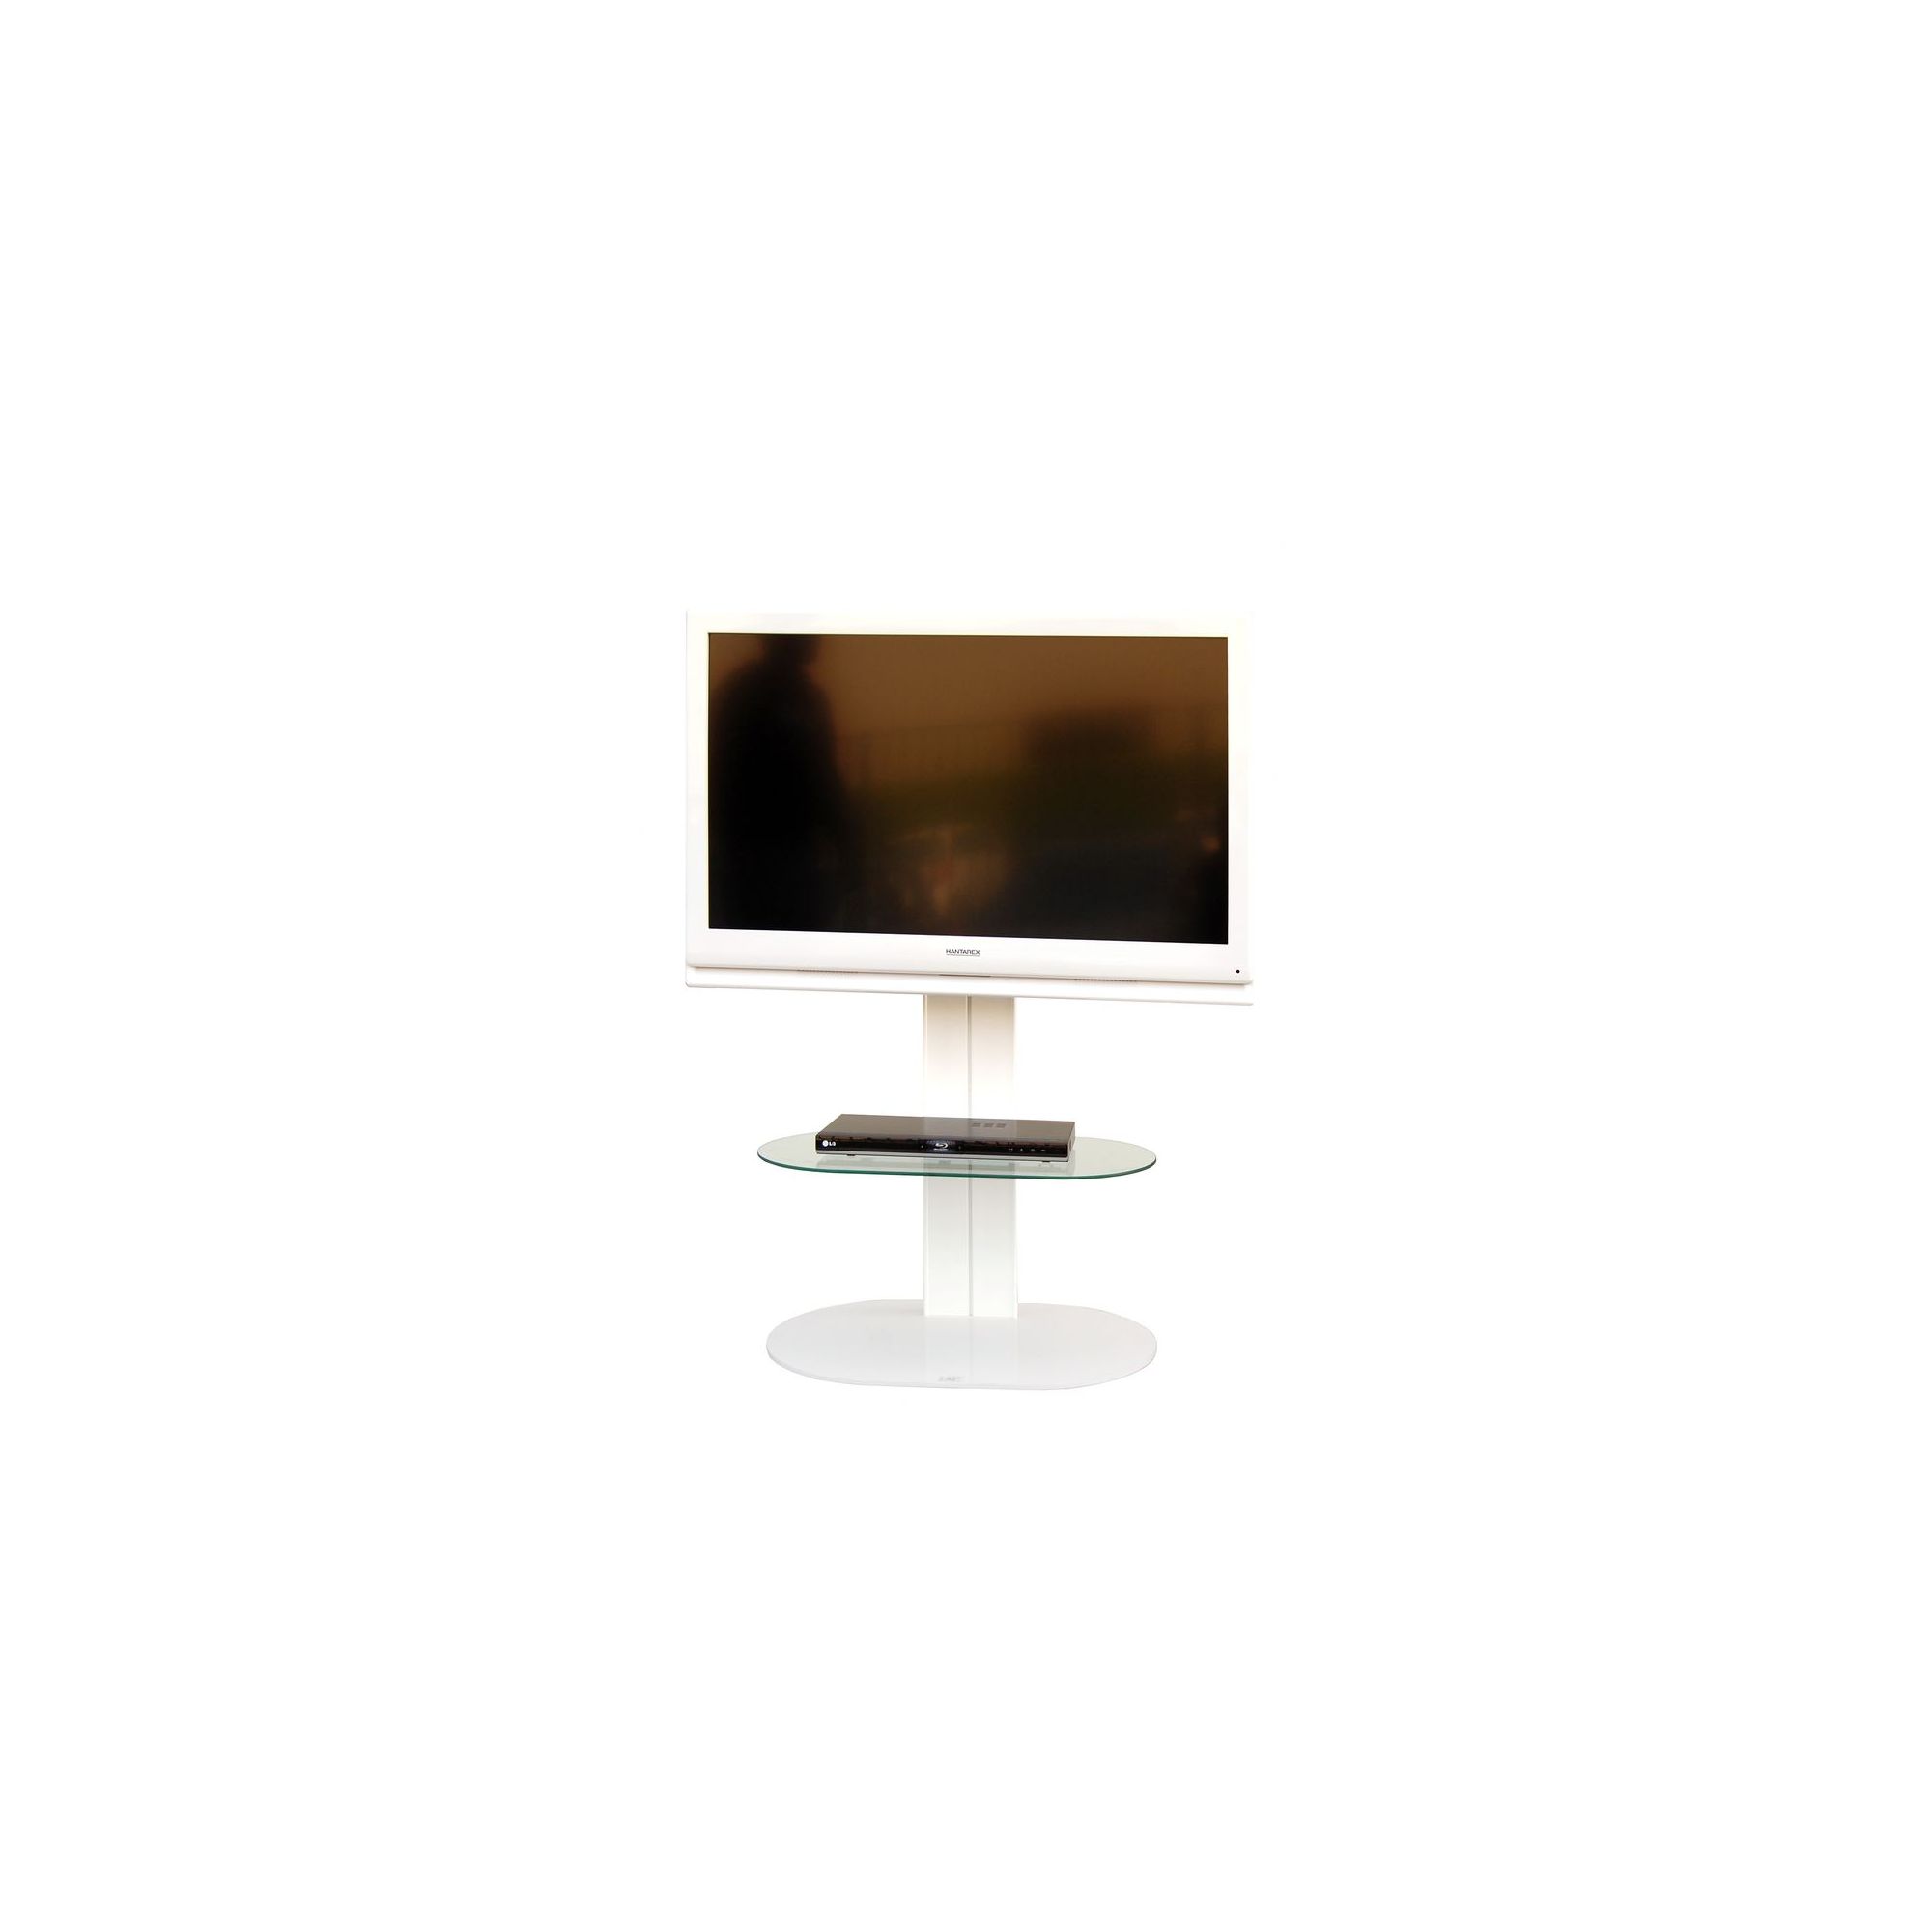 OMB Totem 1200 TV Stand - White at Tesco Direct